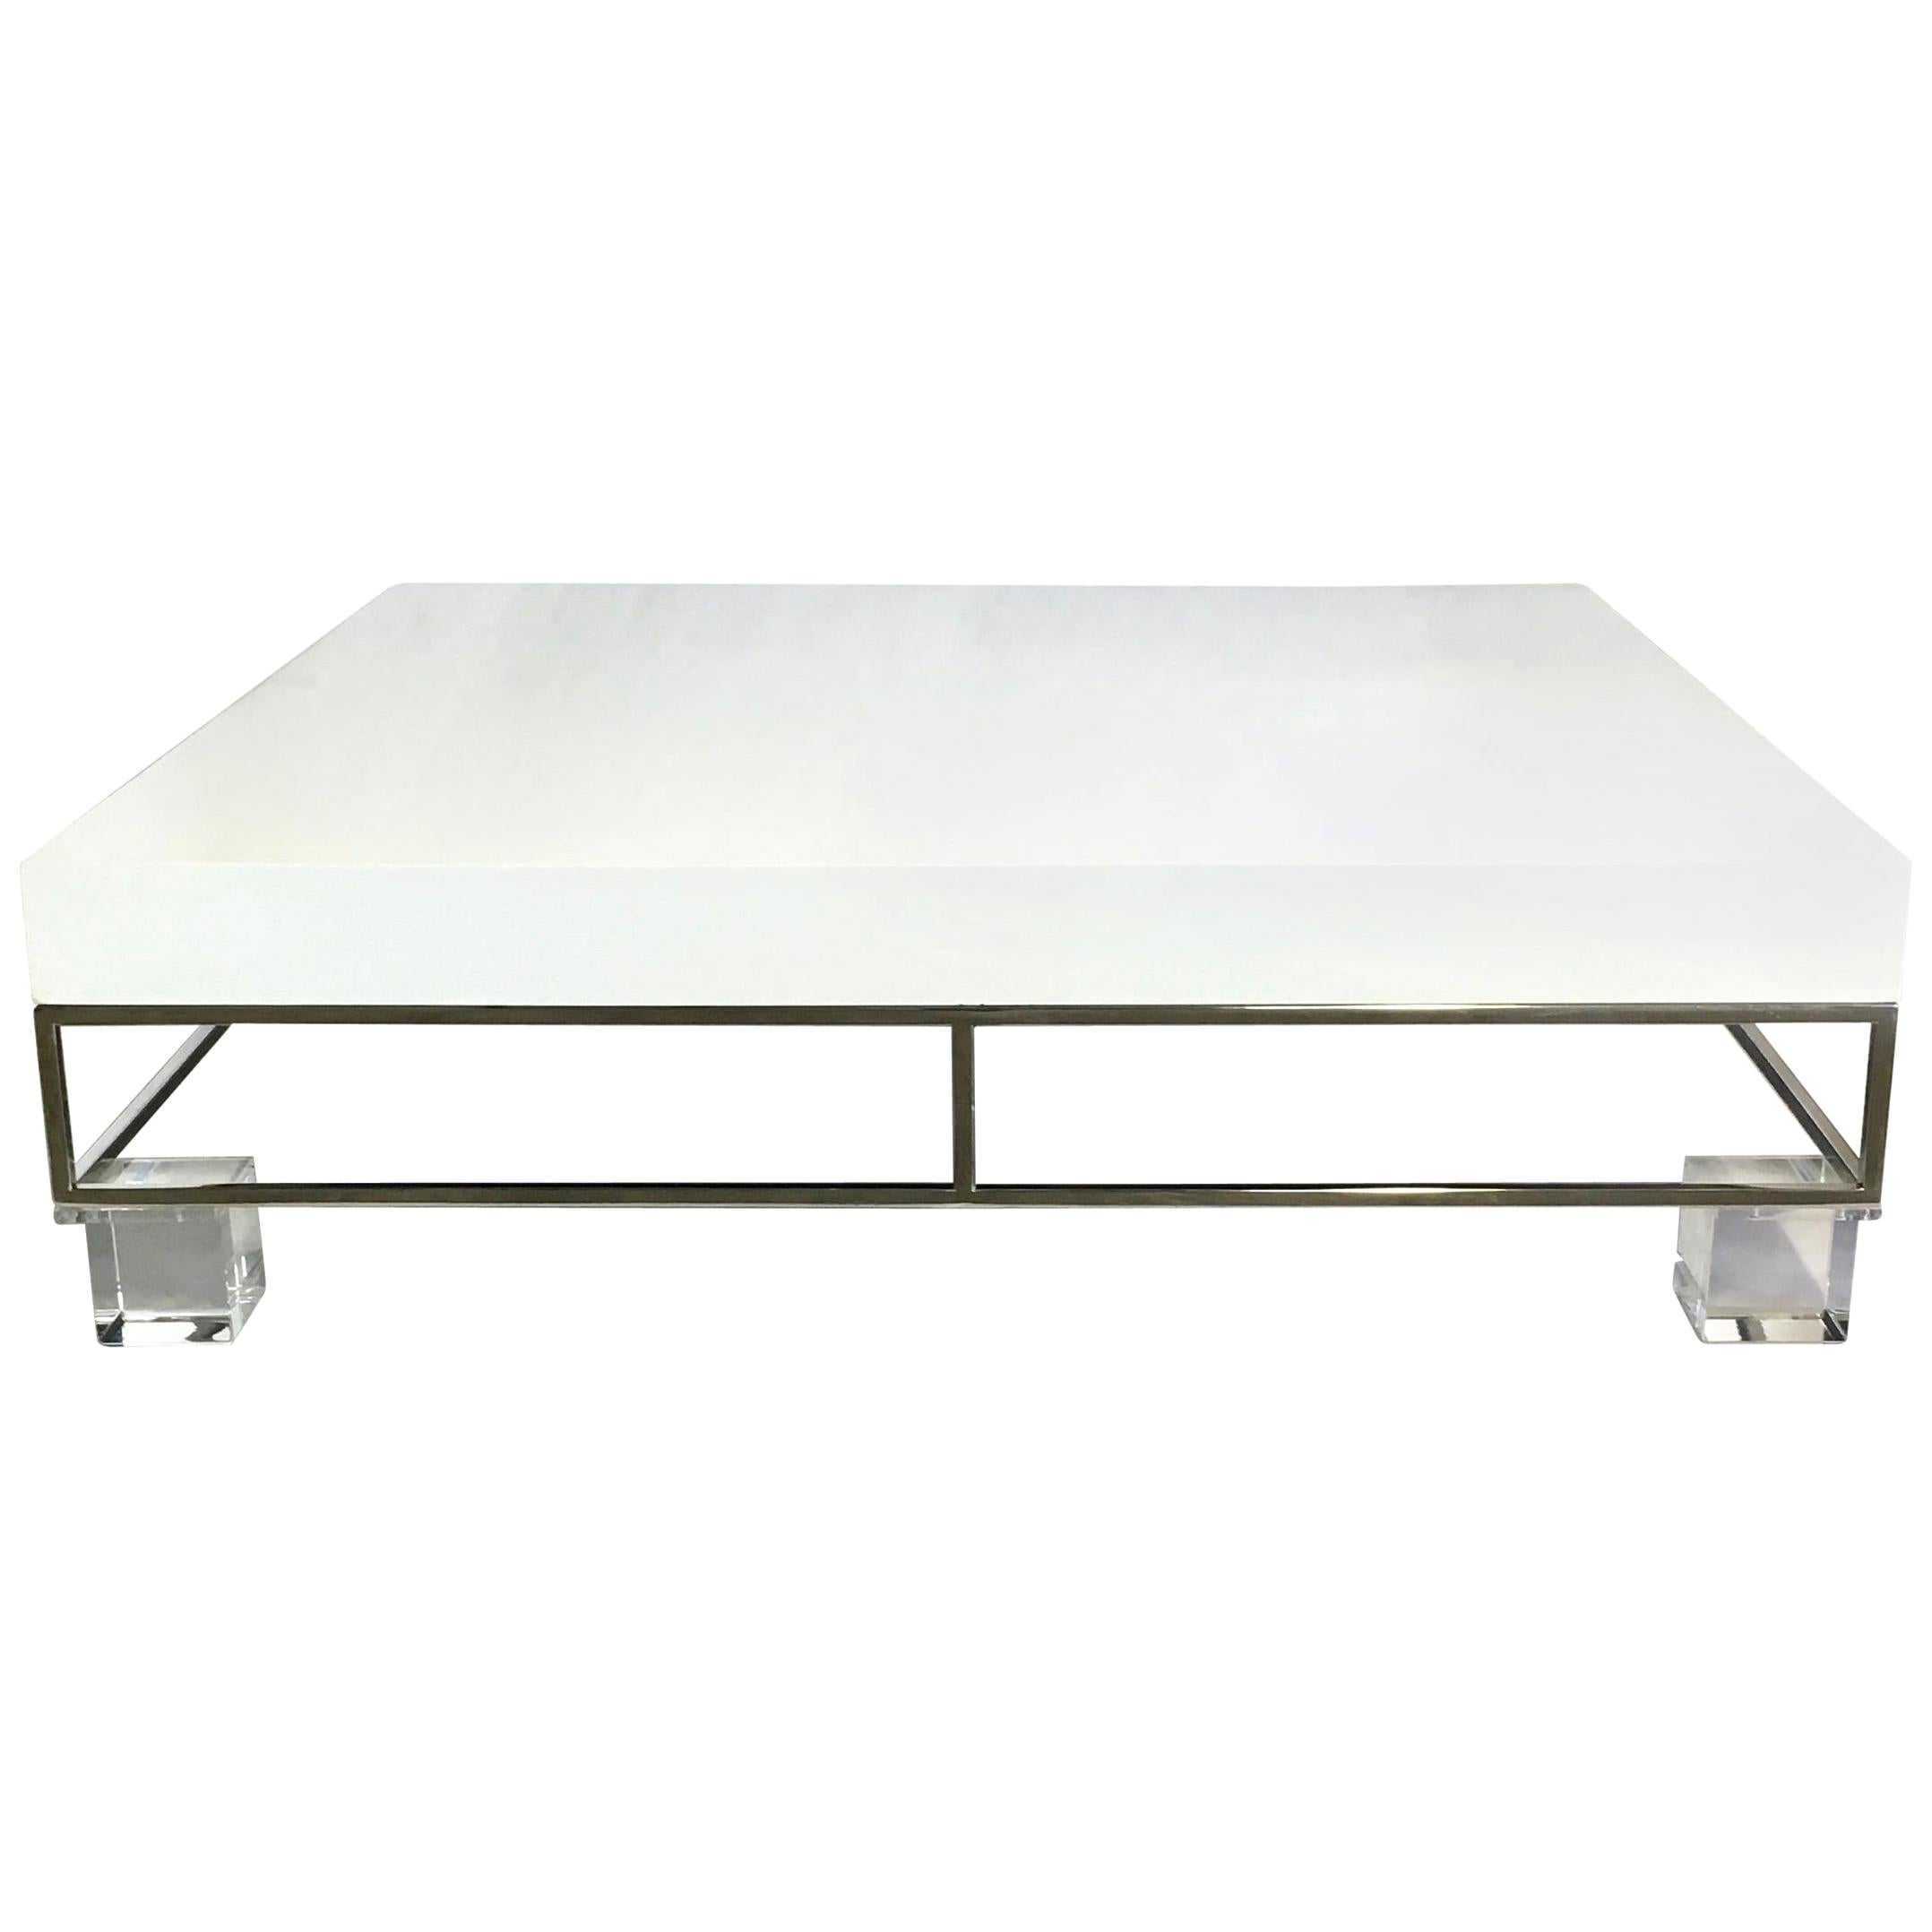 Mid-20th Century Modern Willy Rizzo Style Lacquered and Chrome Lucite Leg Table For Sale